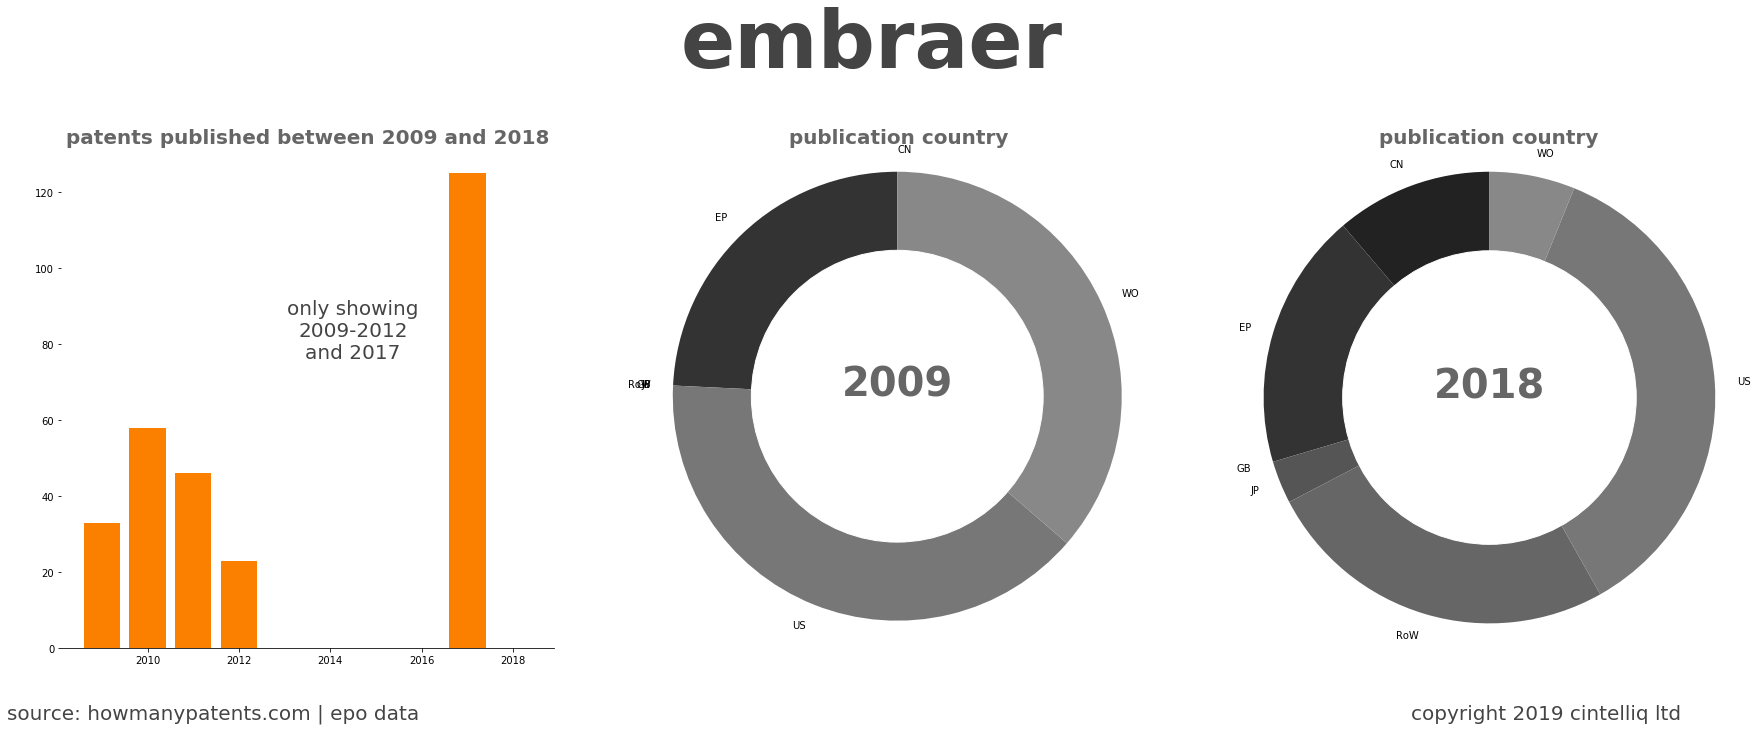 summary of patents for Embraer